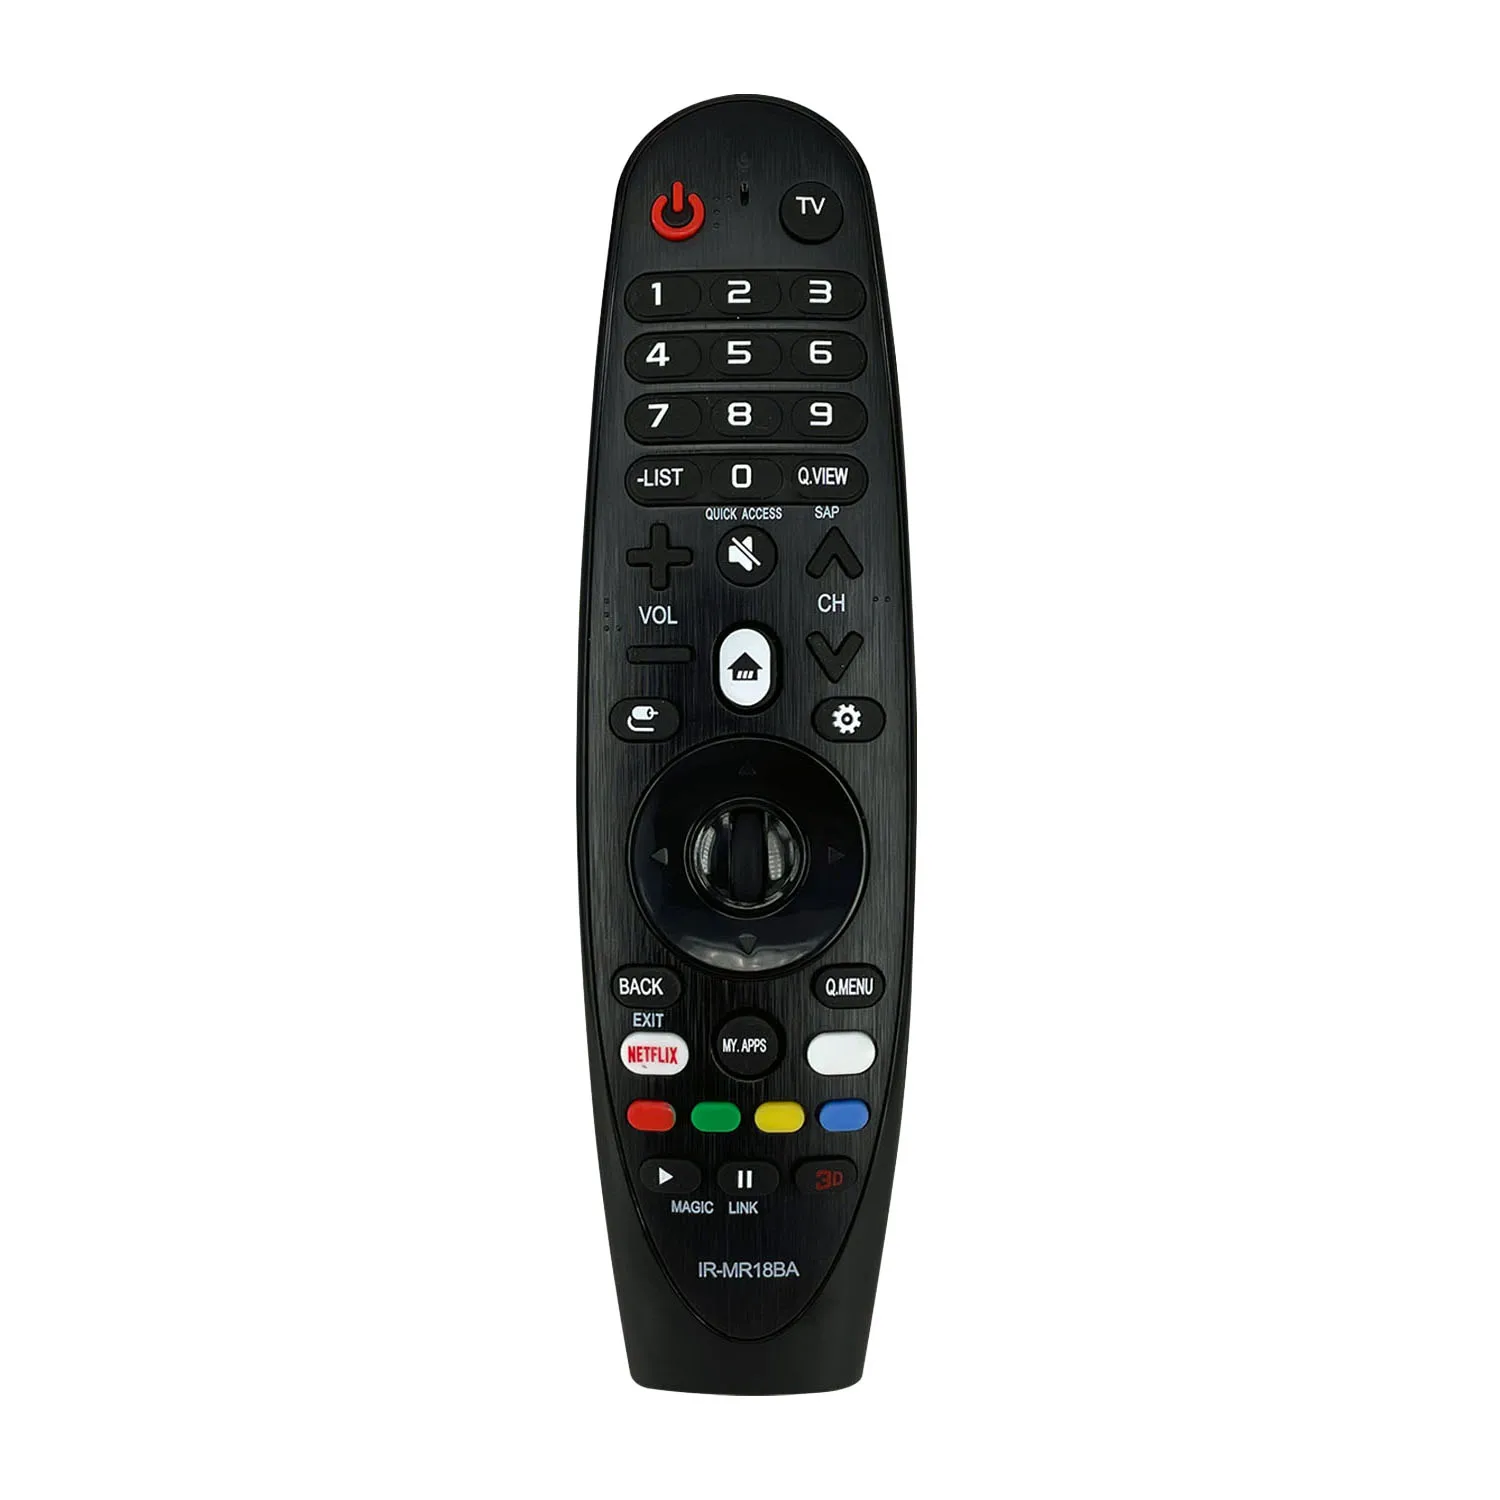 

IR-MR18BA TV Remote Control for LG IR-MR18BA Smart TV Infrared Universal Replacement Remote Control